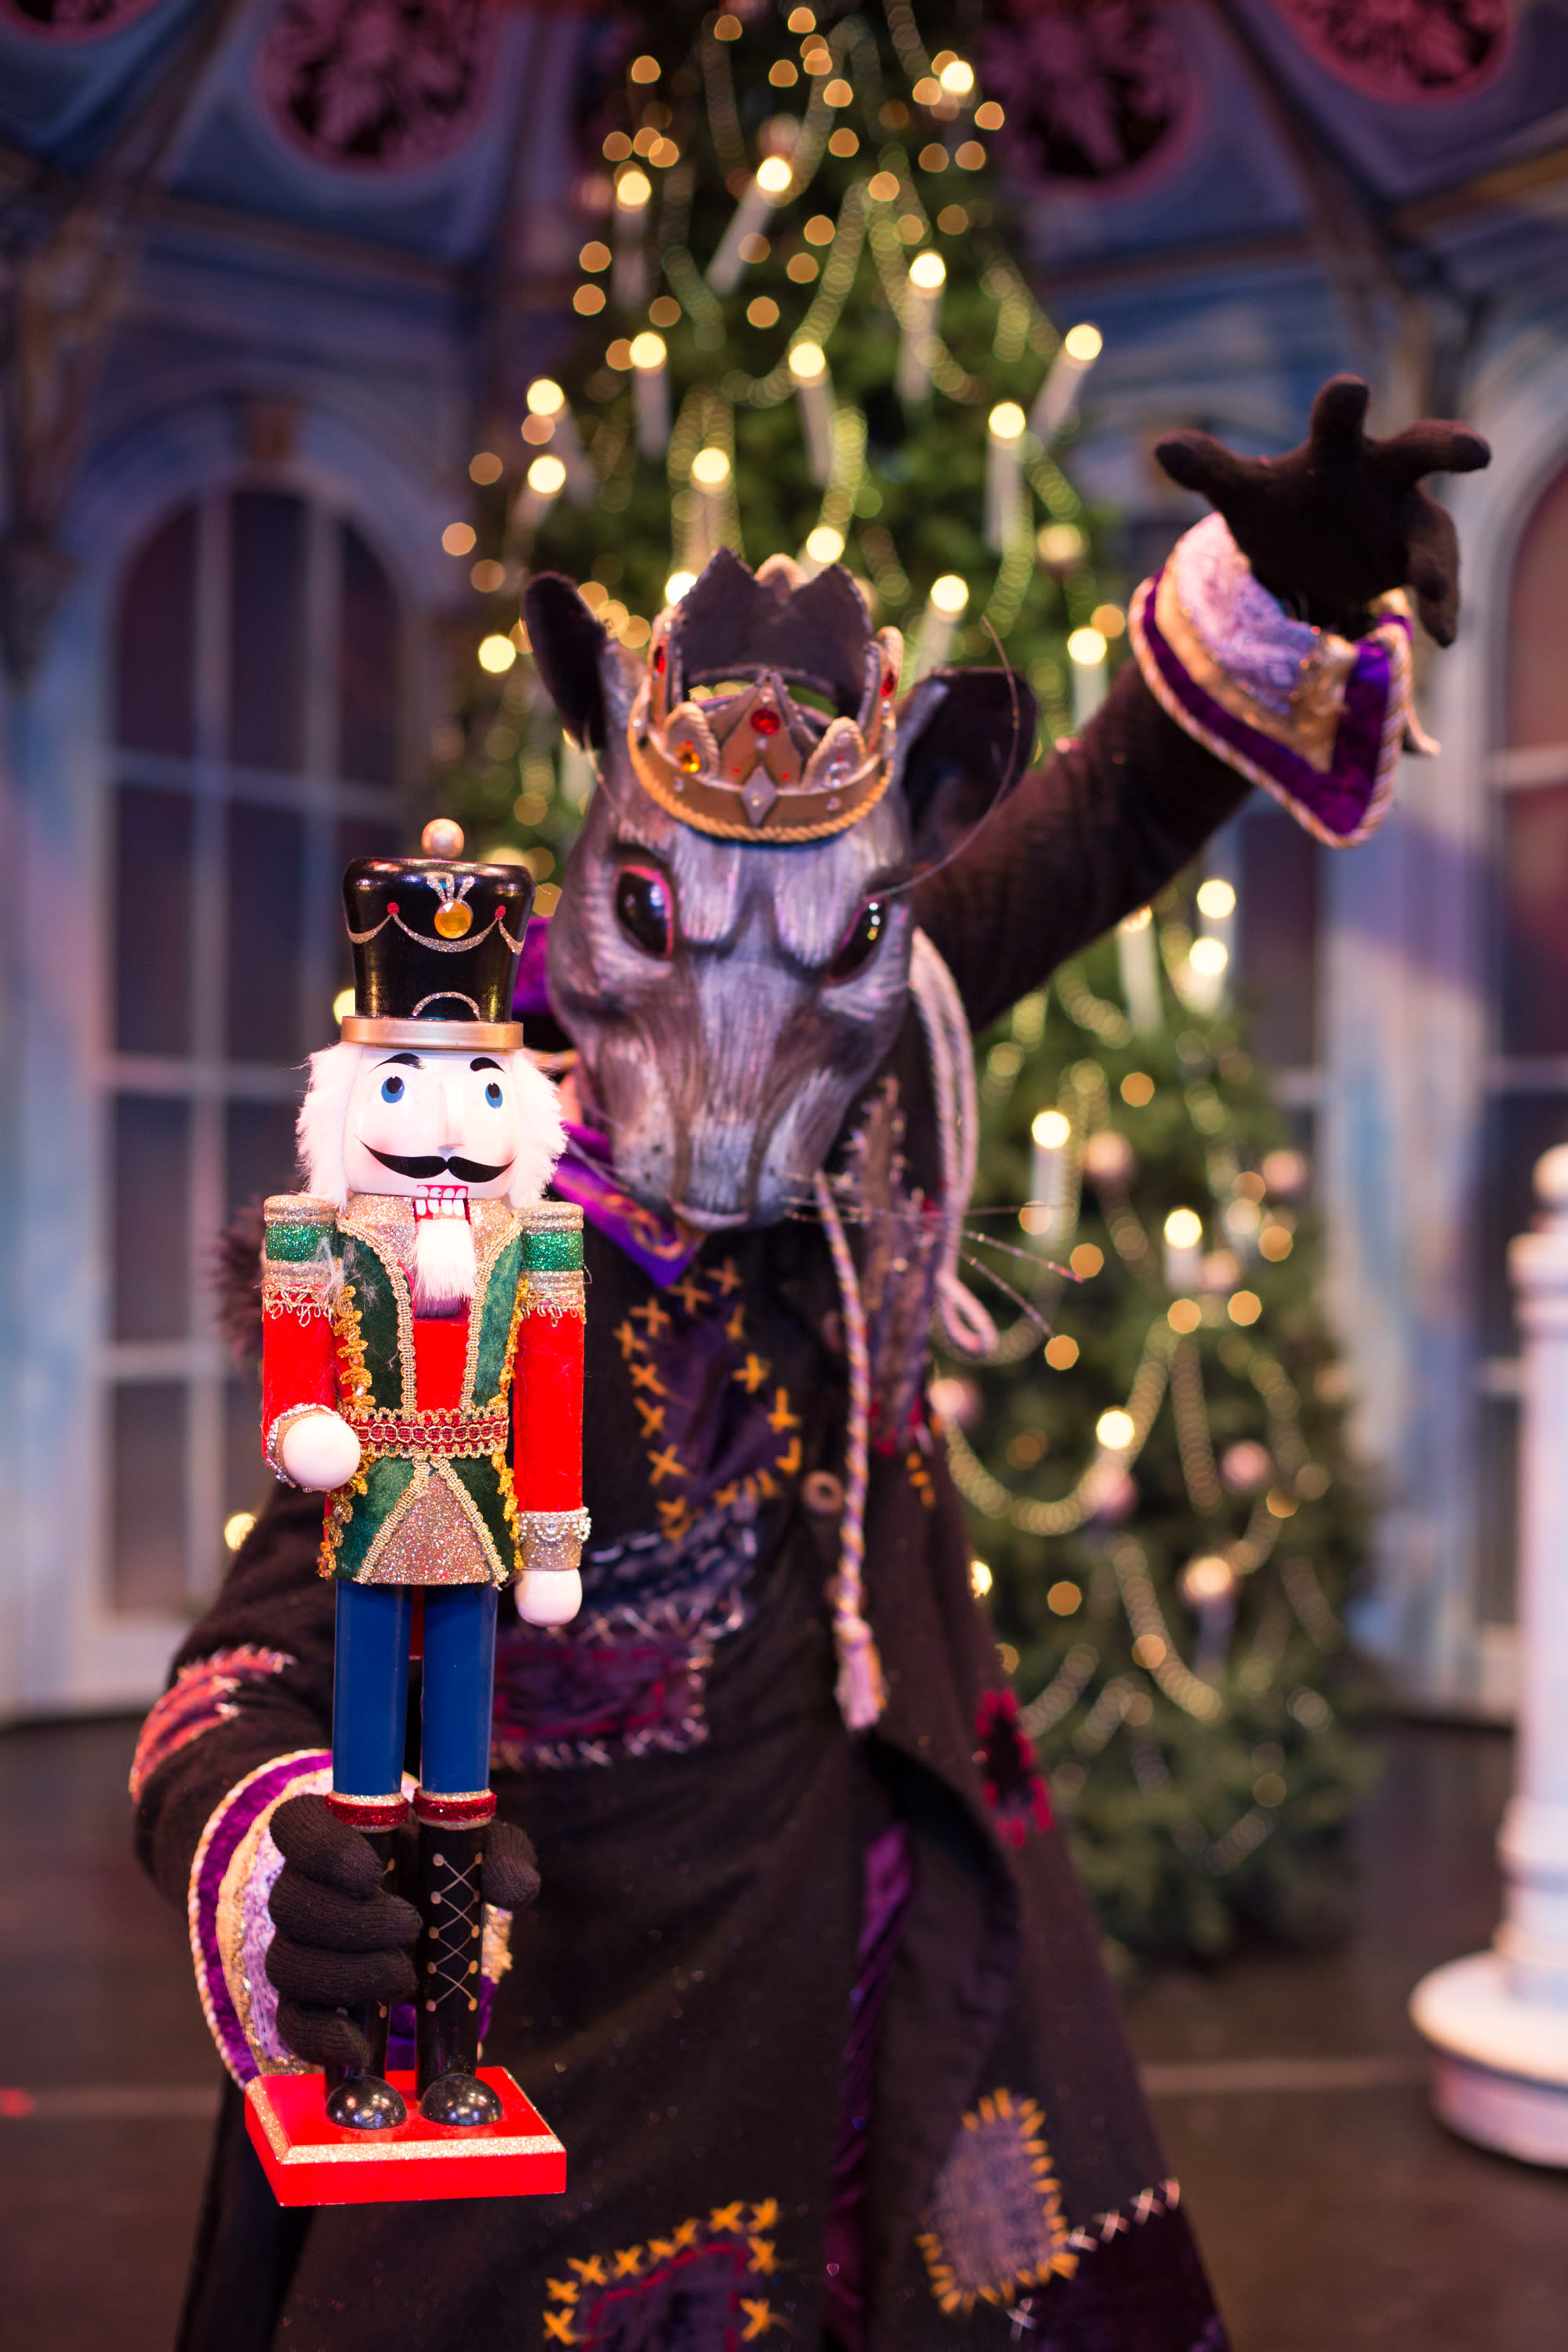 The King of the Rats — or as we might call him in Santa Fe, El Rey de Ratons — will never defeat the Brave Nutcracker